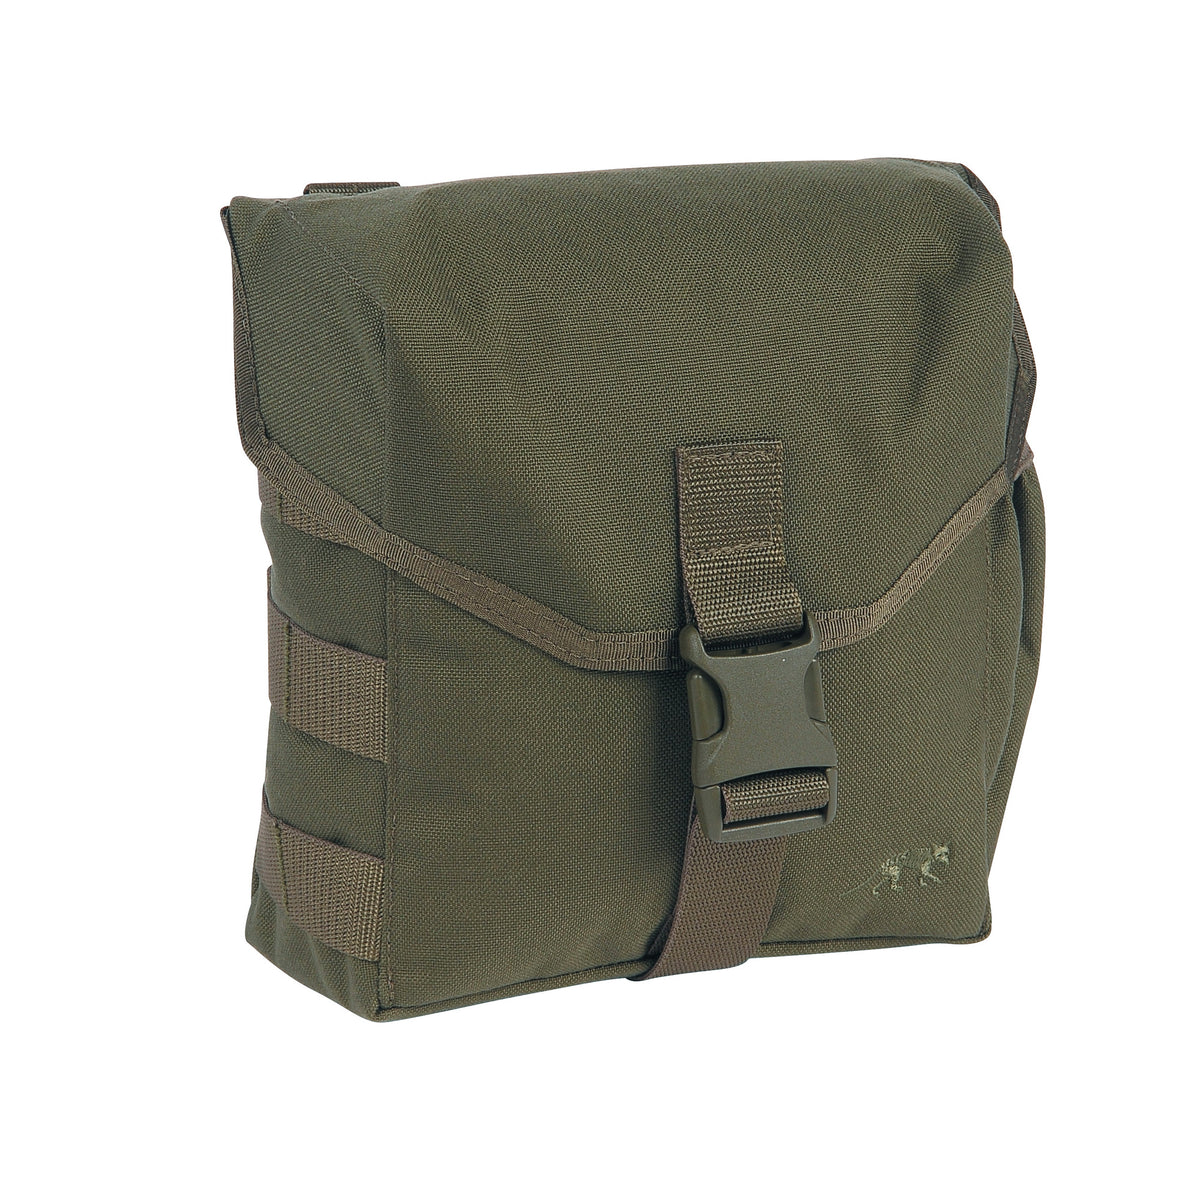 Canteen Pouch MKII di Tasmanian Tiger variante olive - vista  frontale